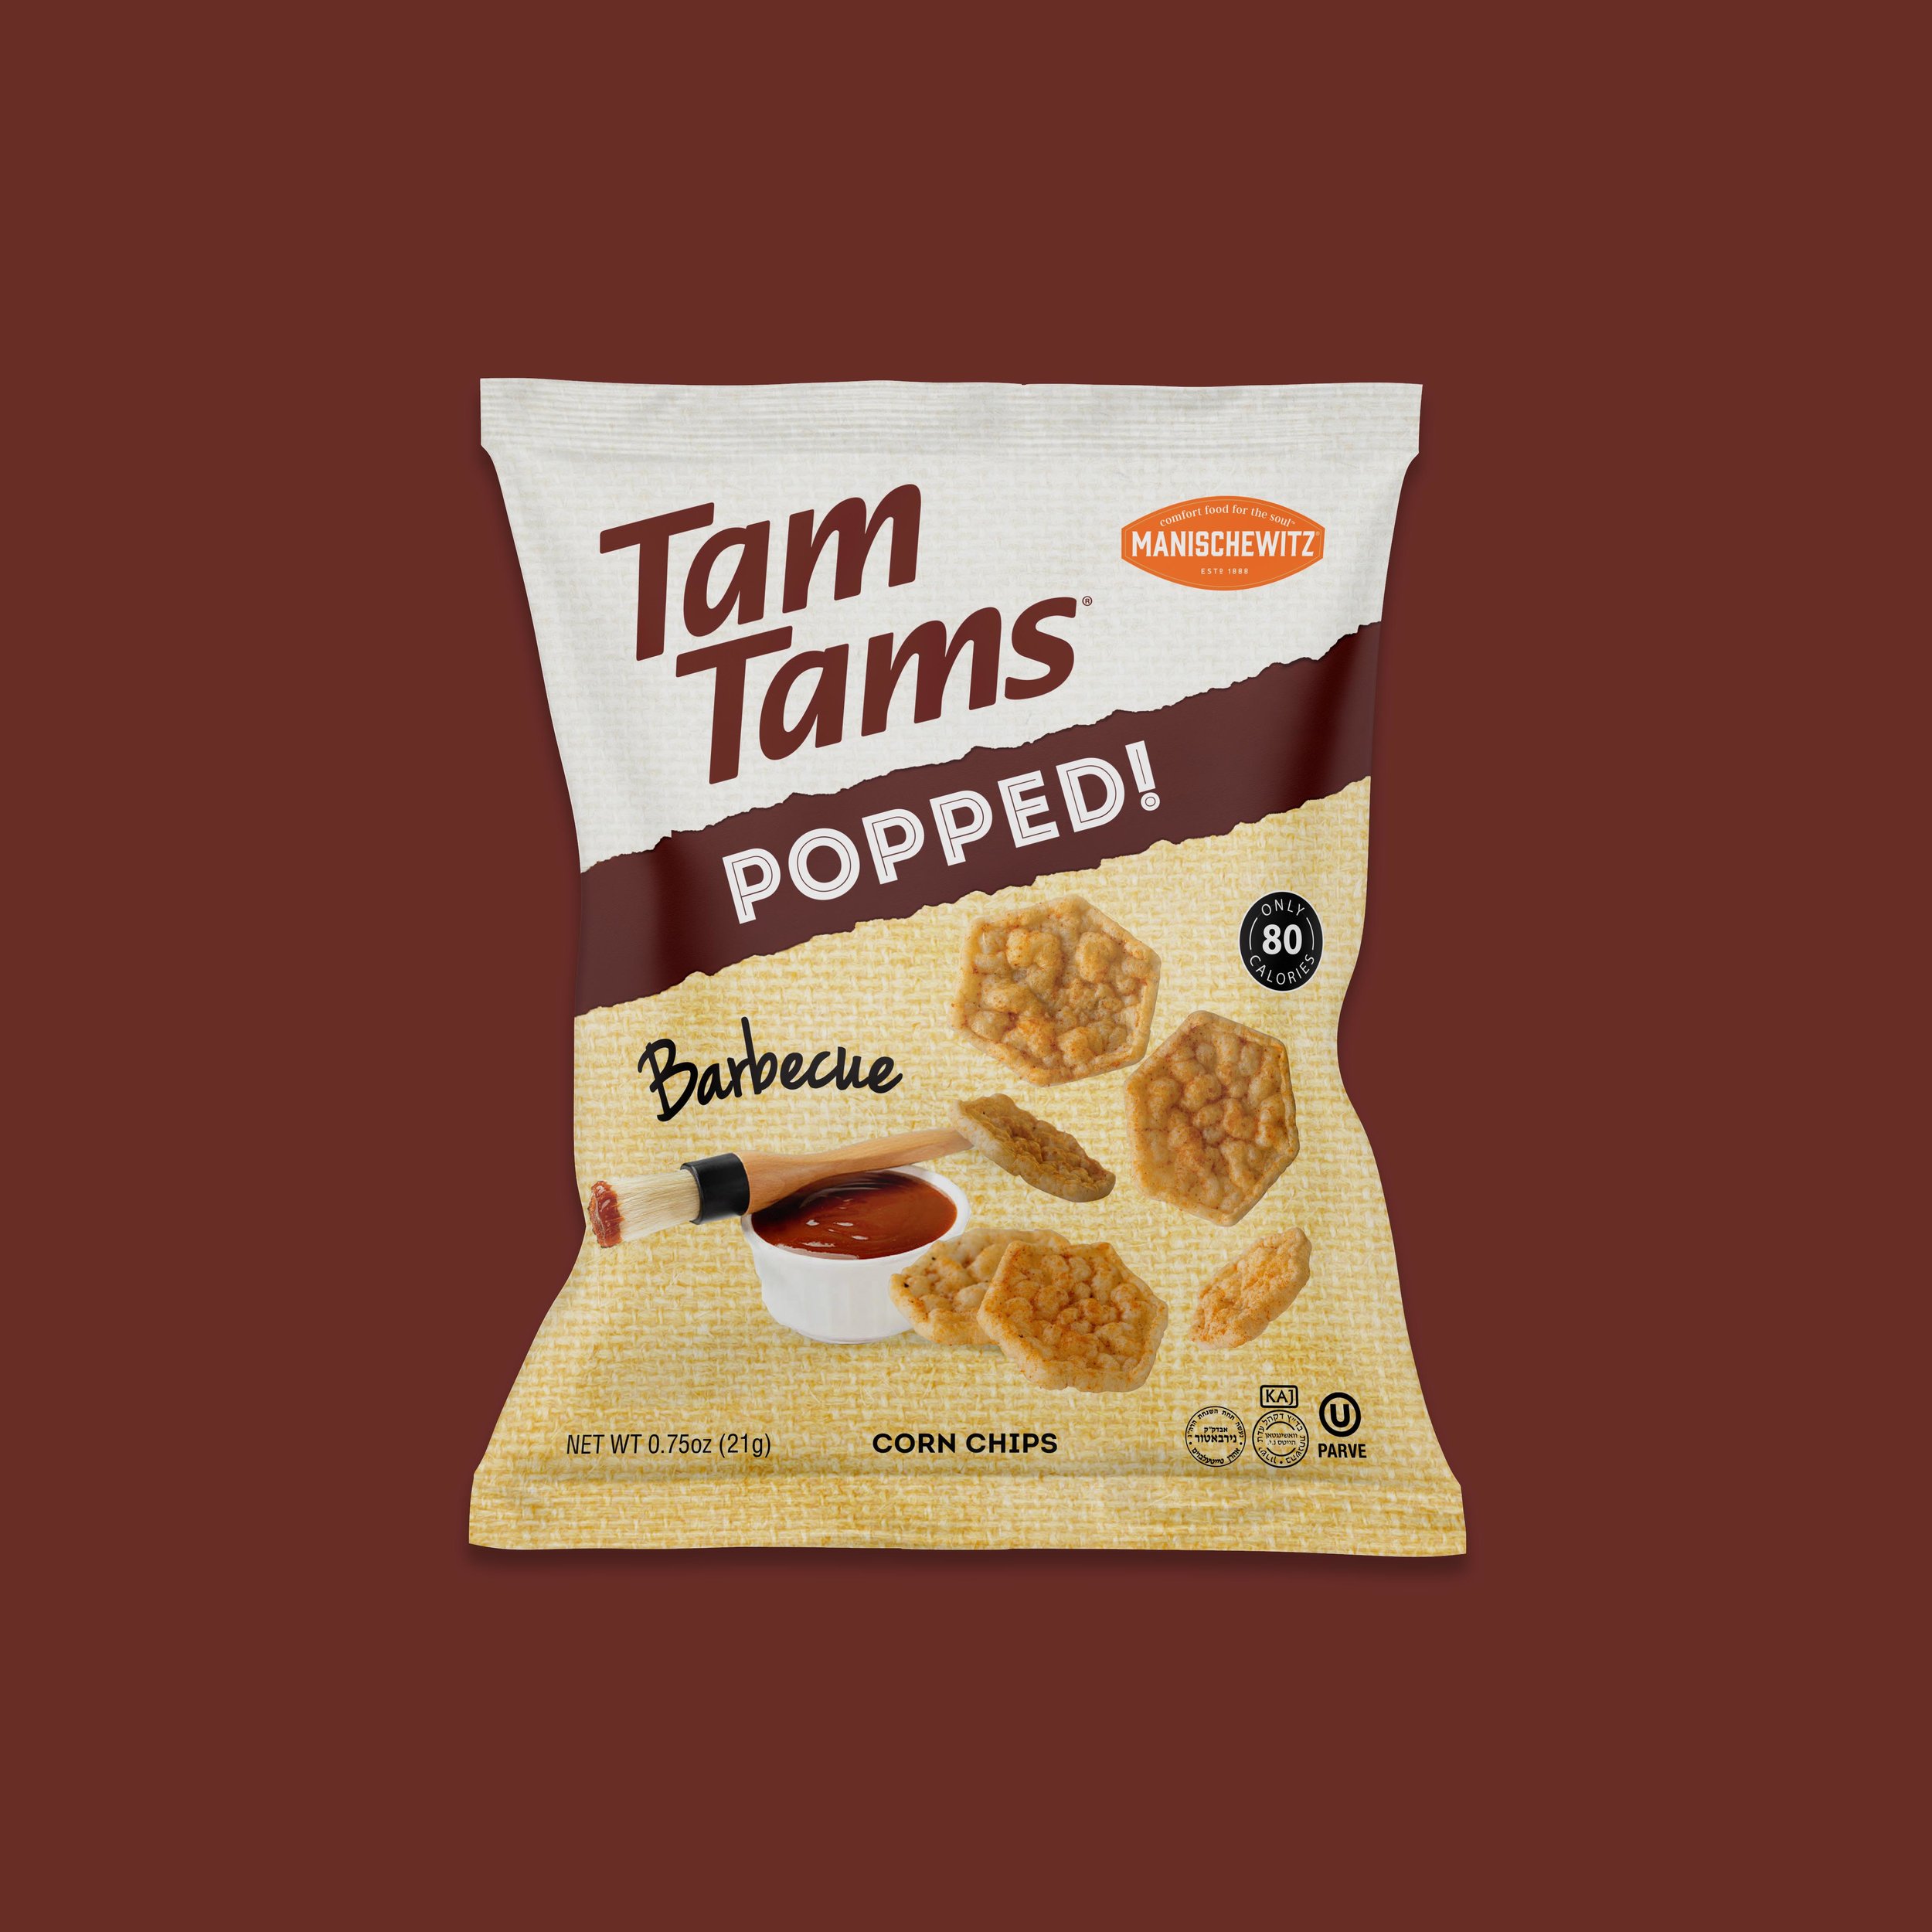 Packaging Design for Tam Tams Popped!